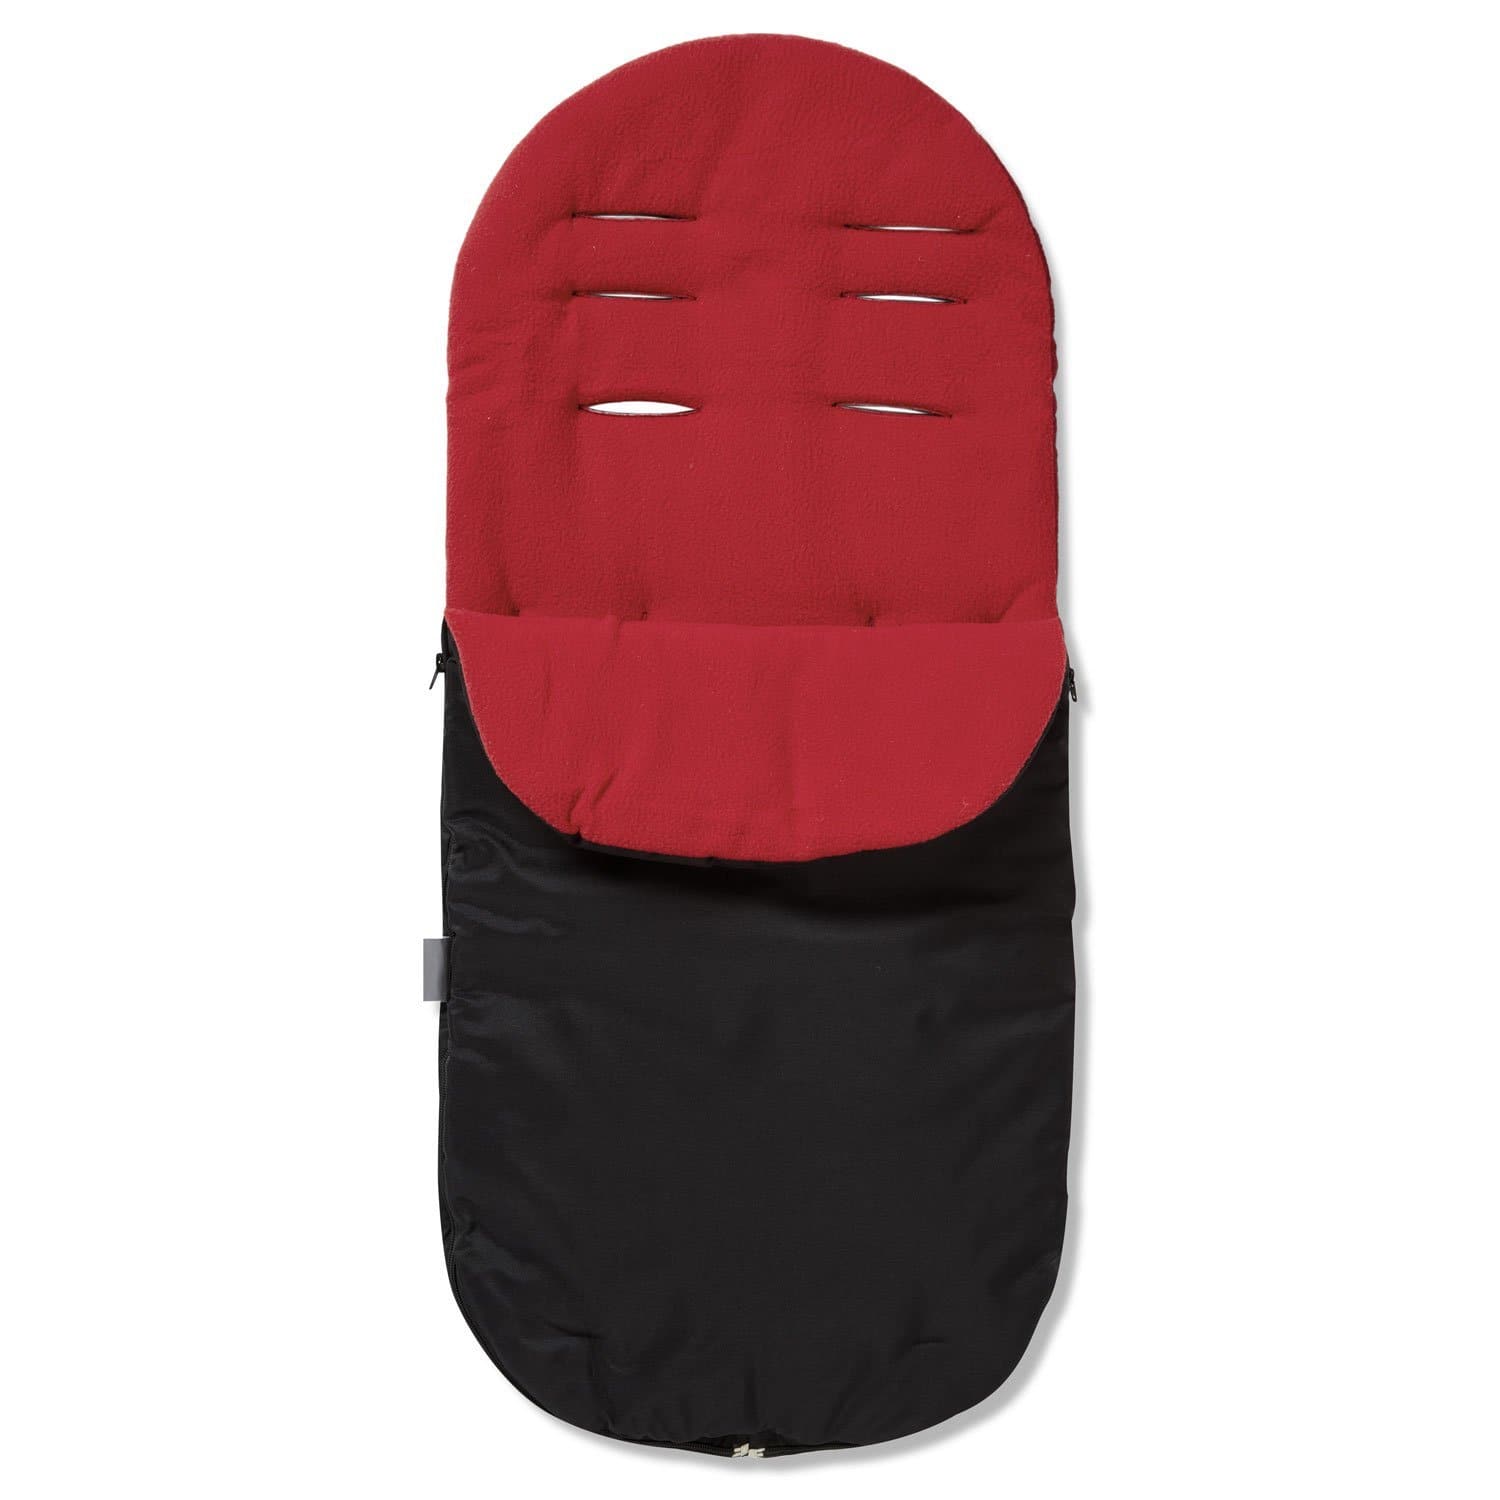 Footmuff / Cosy Toes Compatible with Baby Weavers - Red / Fits All Models | For Your Little One